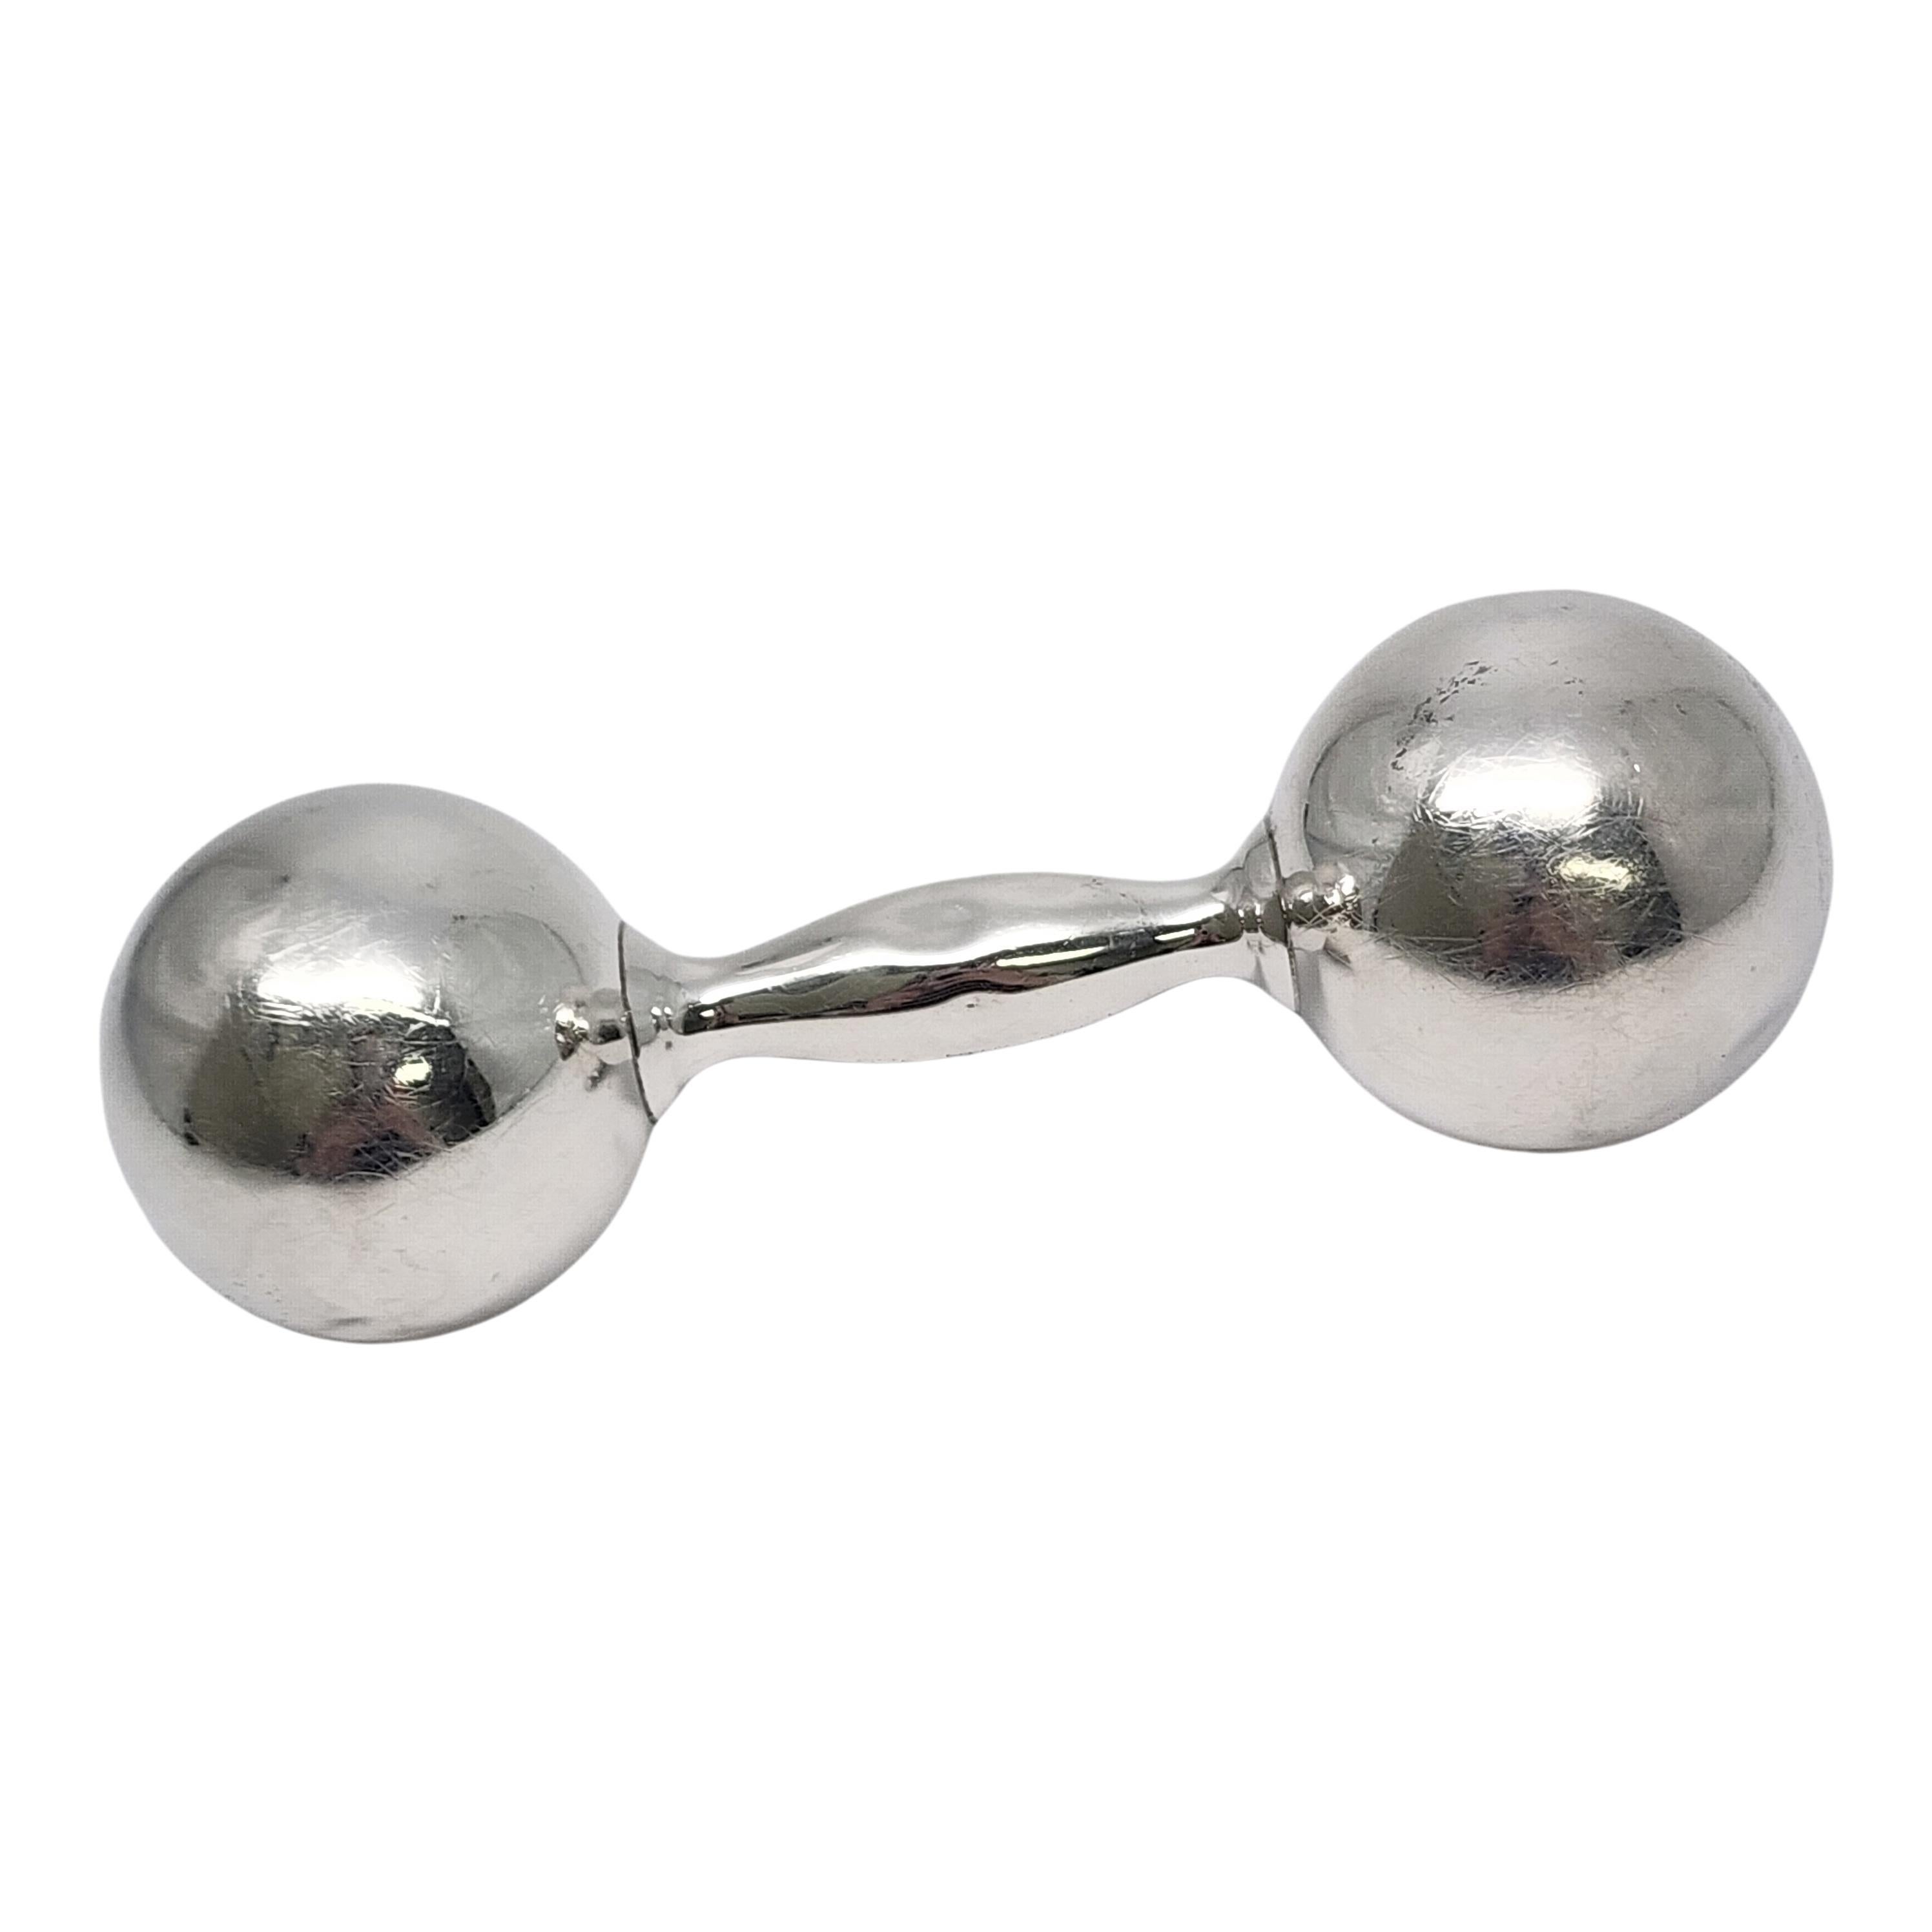 Tiffany & Co sterling silver barbell rattle with monogram.

Monogram appears to be CBK (see photos)

This is a beautiful and charming authentic sterling silver dumbbell baby rattle designed by Tiffany & Co. It has a soft sweet jingle when you shake